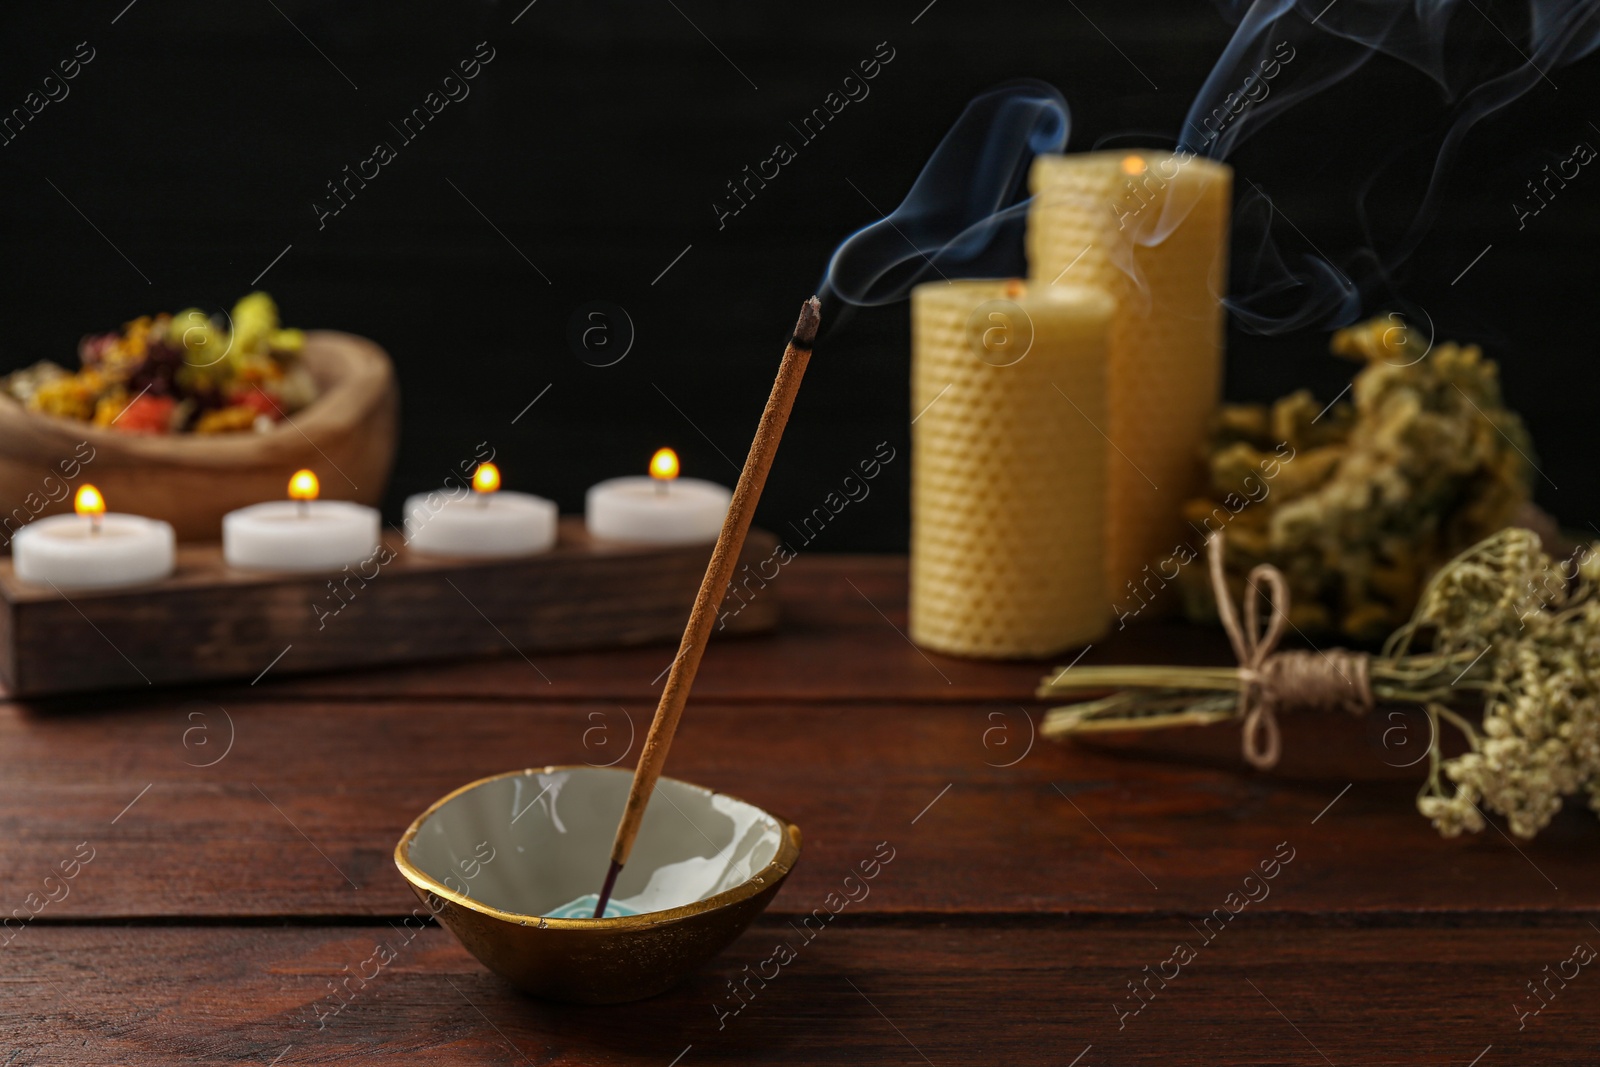 Photo of Aromatic incense stick smoldering on wooden table